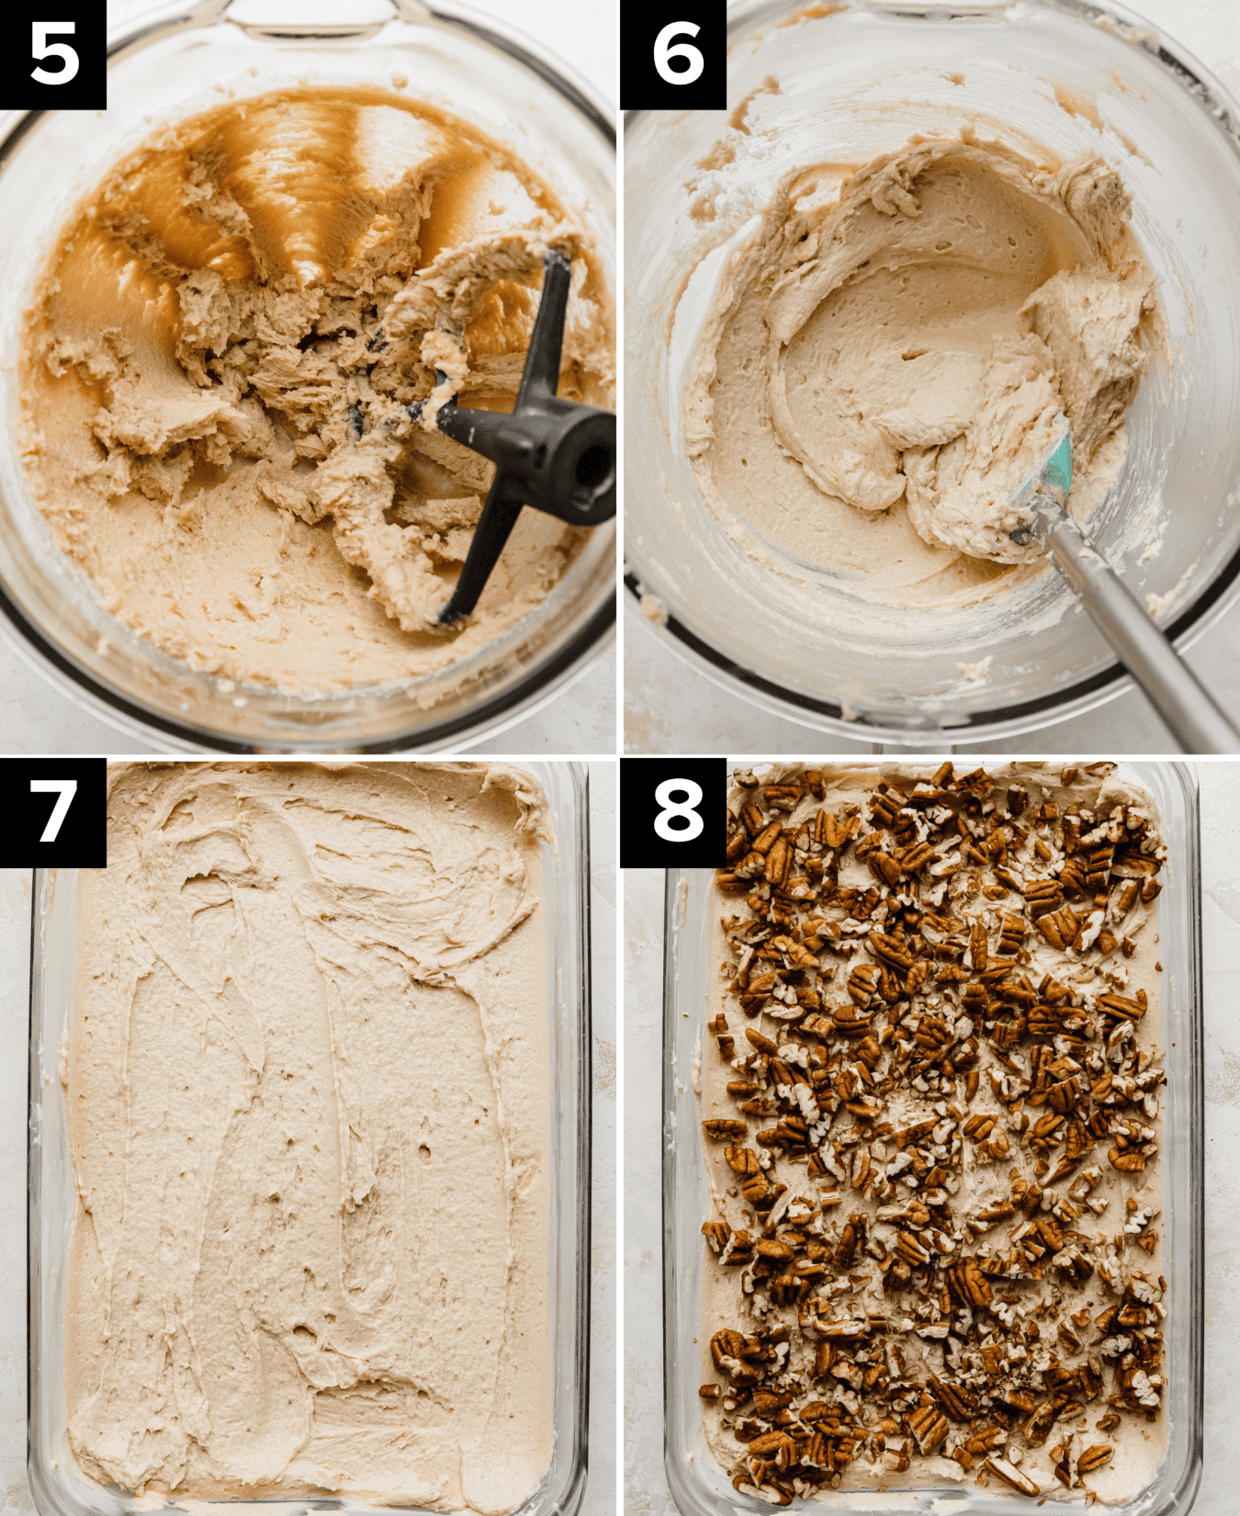 Four images showing the making of caramel glaze for pecan sticky buns, top left and right is tan colored sugar mixture in glass bowl, bottom left image is tan colored sugar mixture leveled into a glass baking dish, bottom right image is chopped pecans in a glass baking dish.